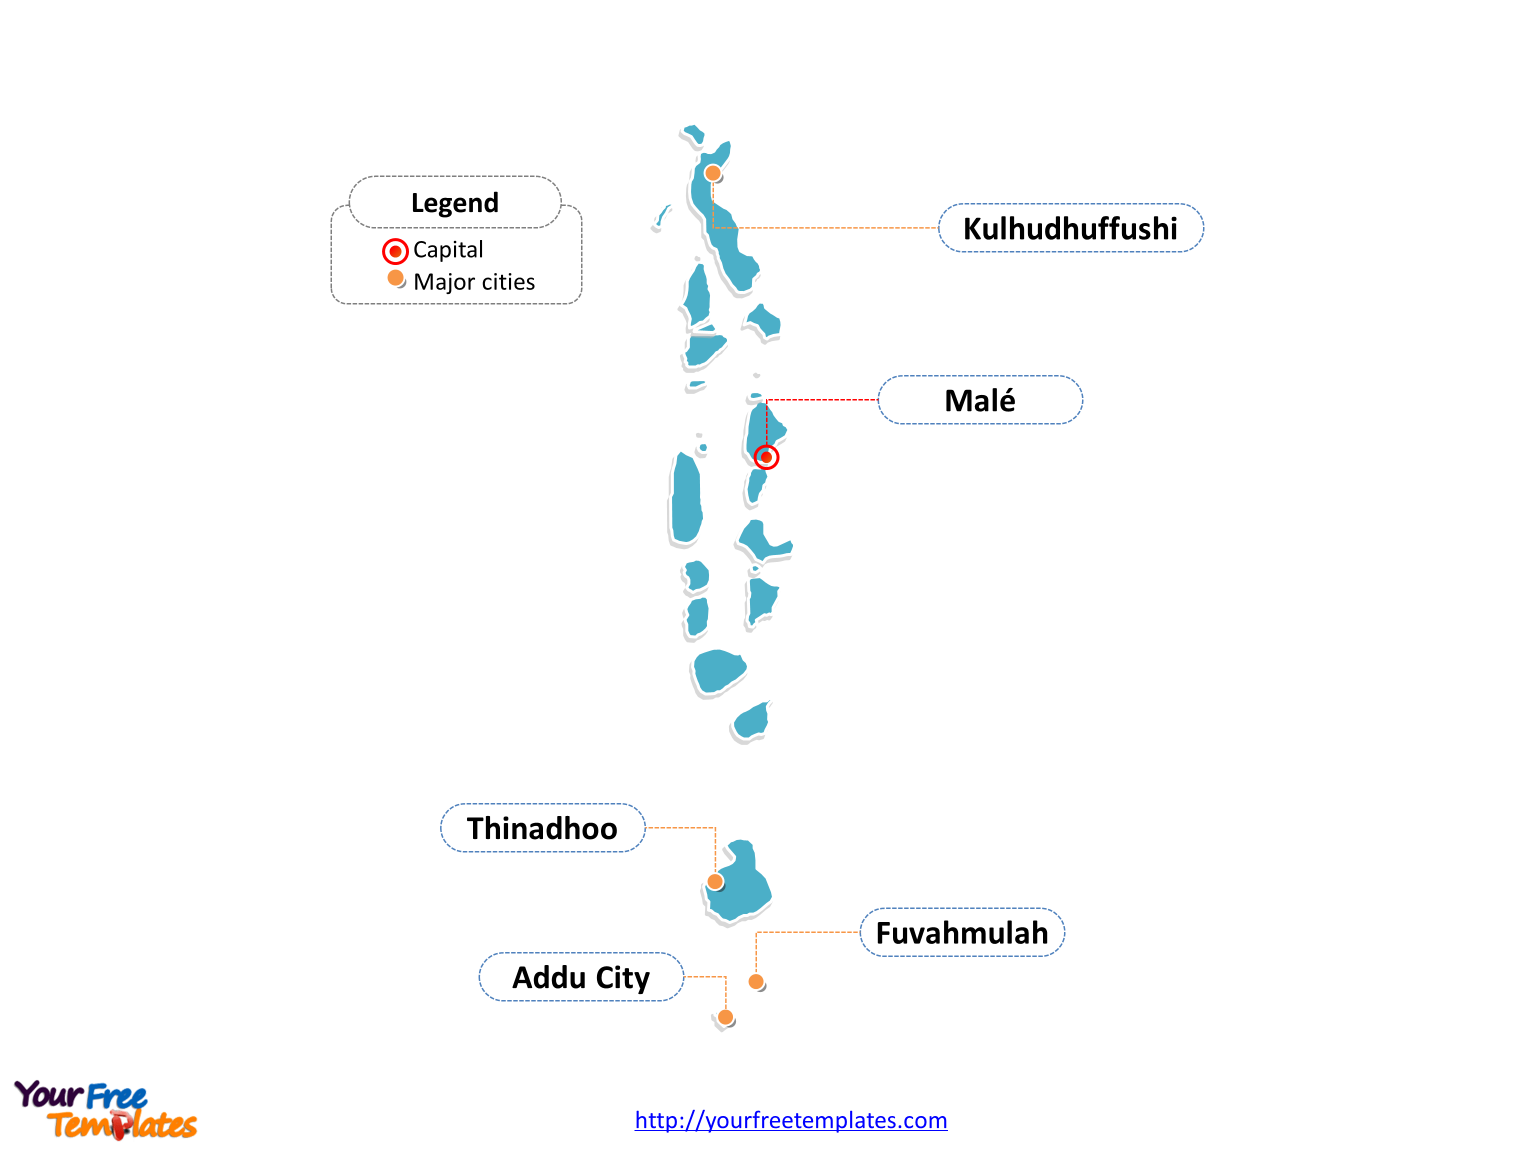 Maldives map labeled with cities